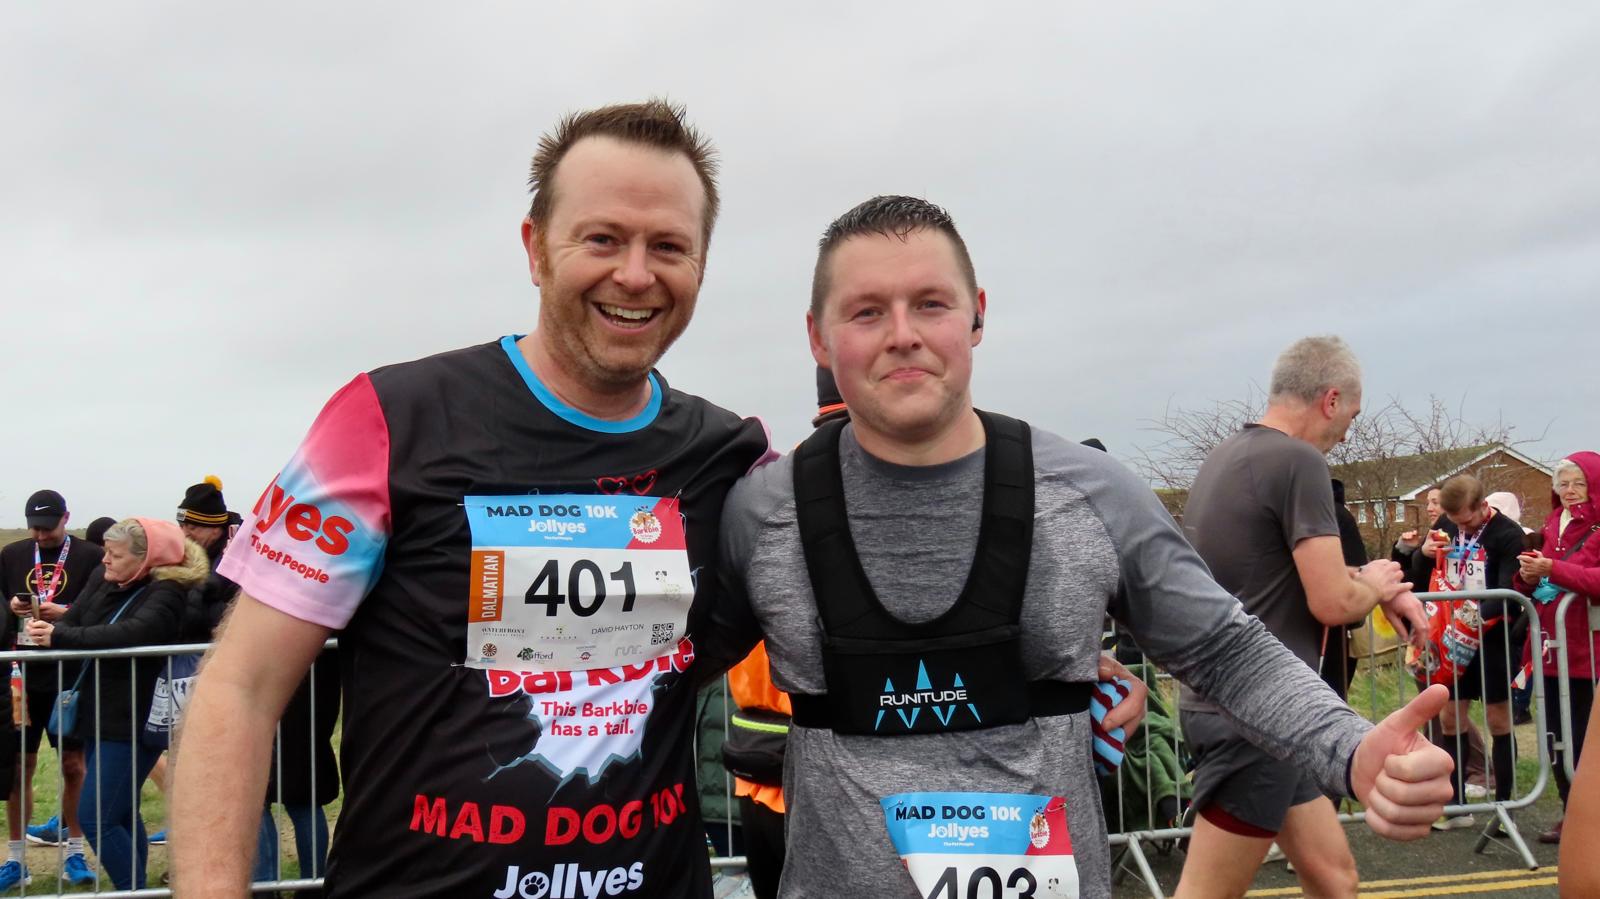 Hundreds of runners enjoyed the Southport Mad Dog 10lk run sponsored by Jollyes - The Pet People. Jollyes CEO Joe Wykes (left) and Jollyes Southport Store Manager Jonny Wareing   Photo by Andrew Brown Arena PR  